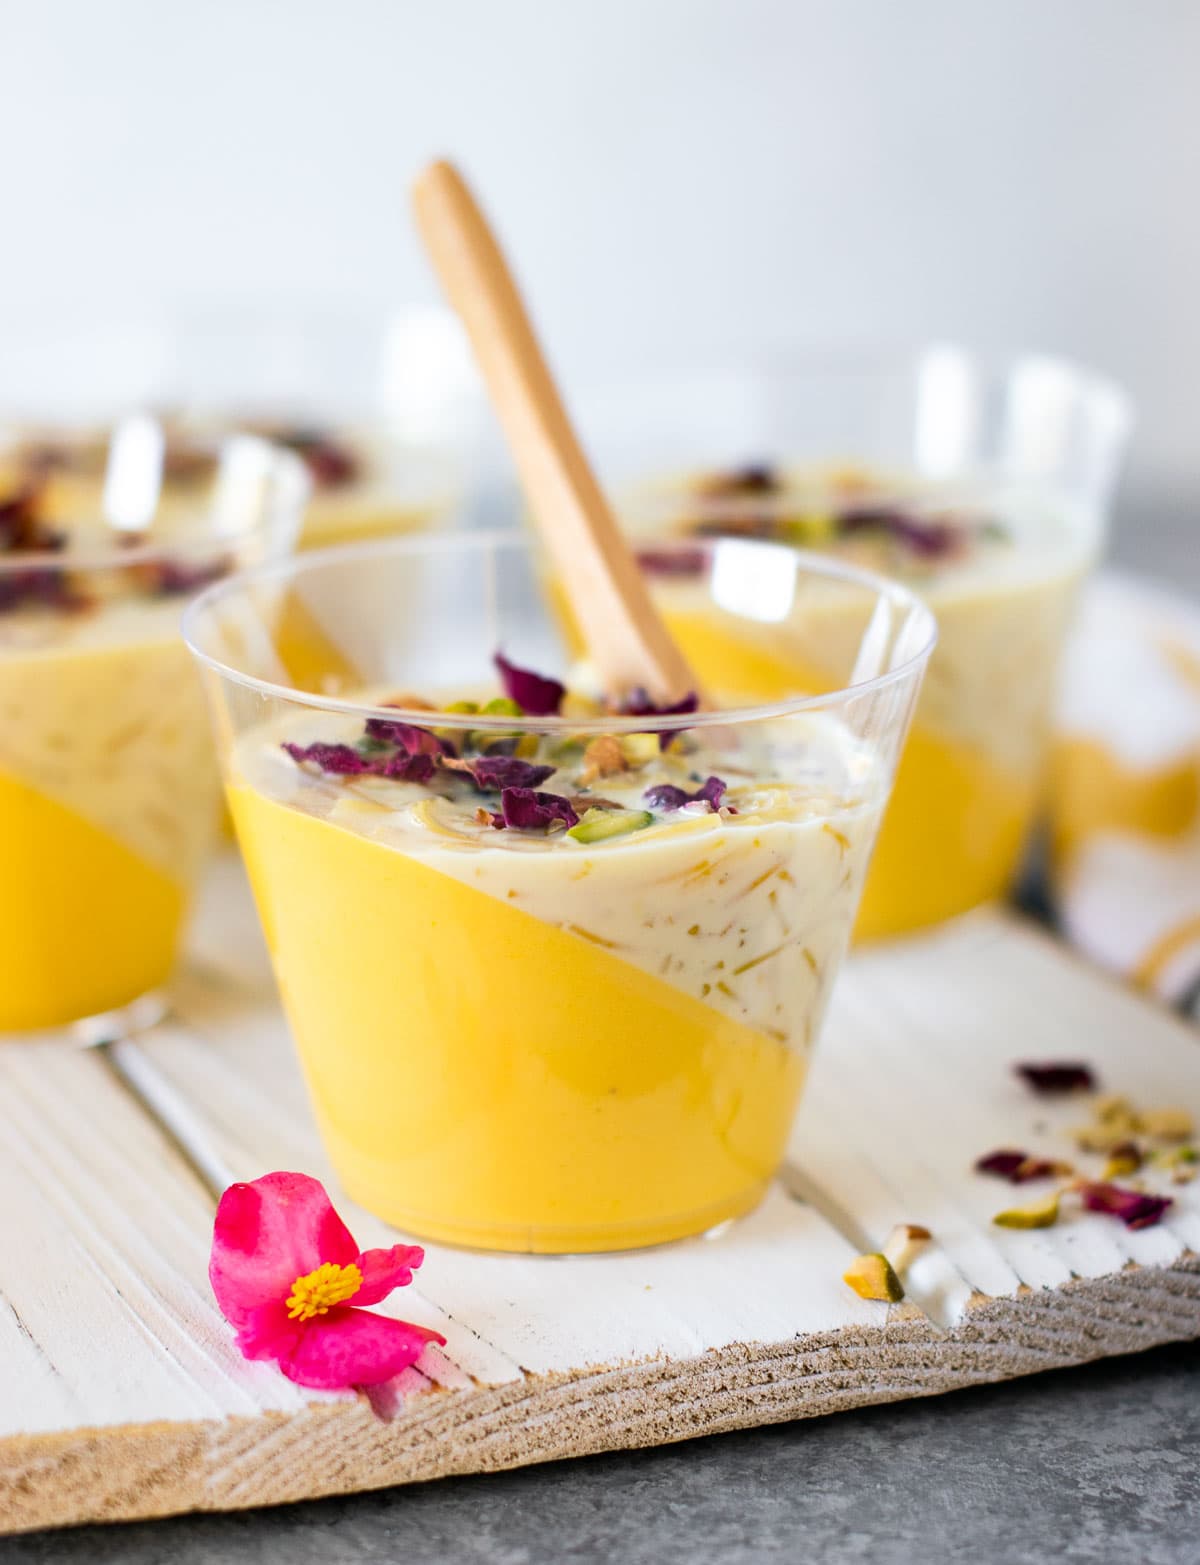 Indian fusion dessert panna cotta and kheer layered in a glass and served with a spoon.